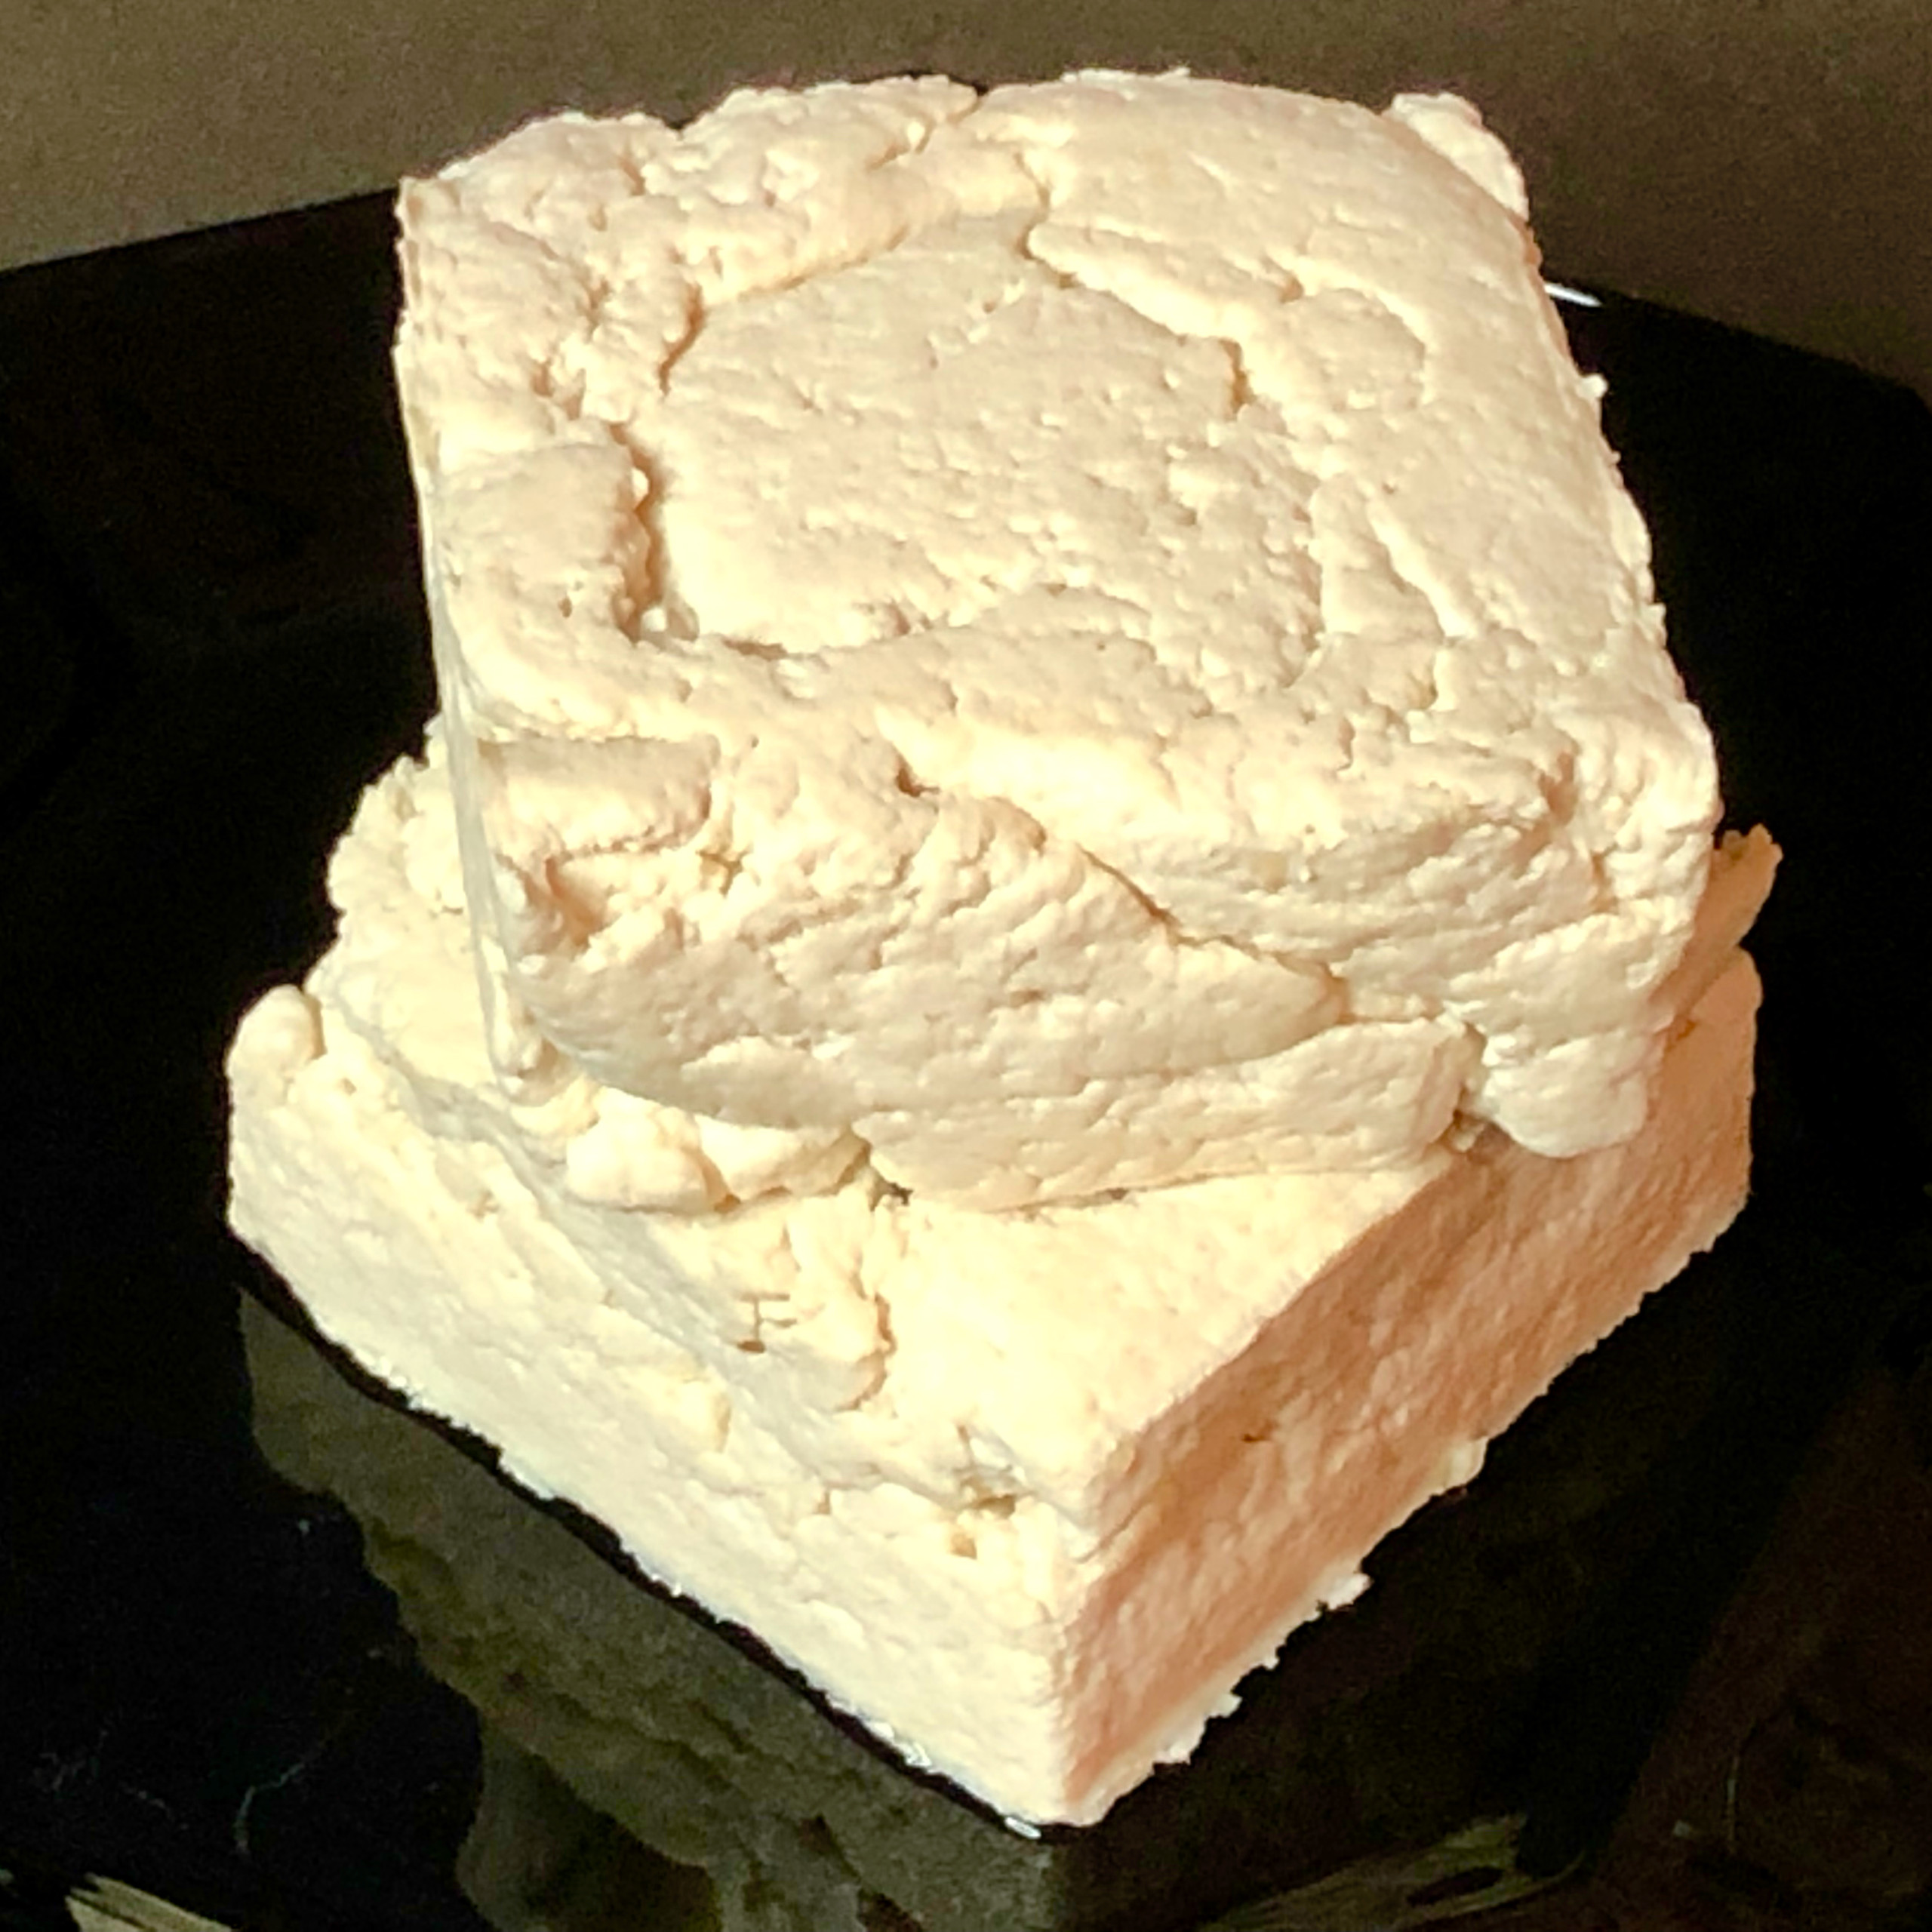 Homemade tofu from soy beans